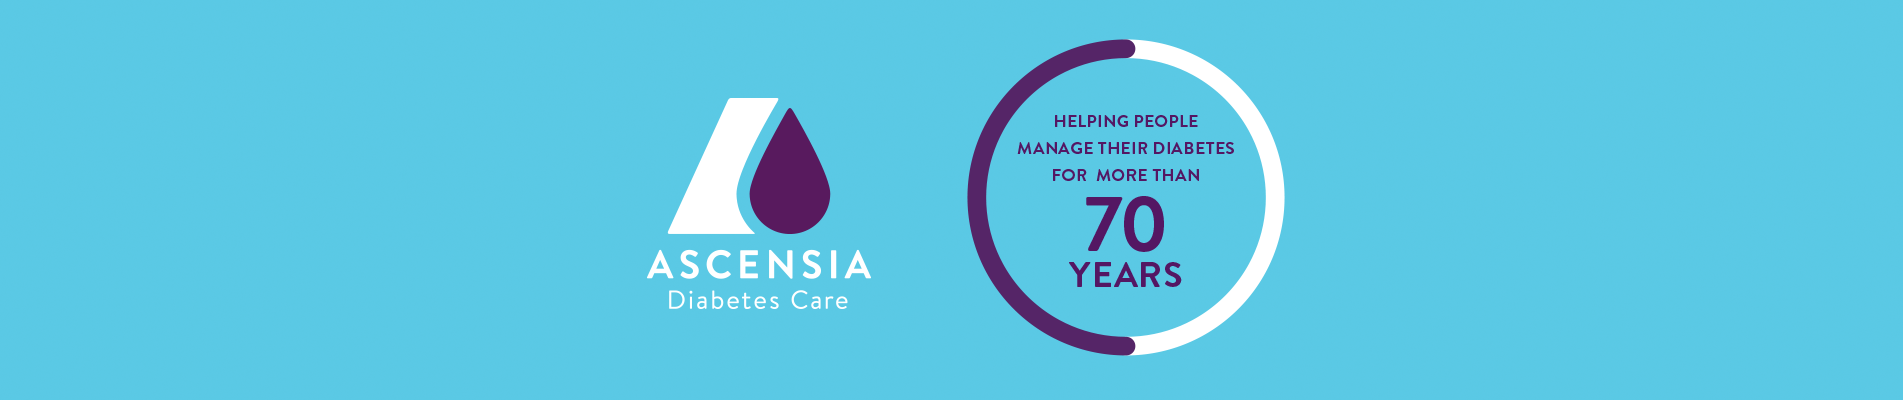 Ascensia Diabetes Care helping people manage their diabetes for more than 70 years 